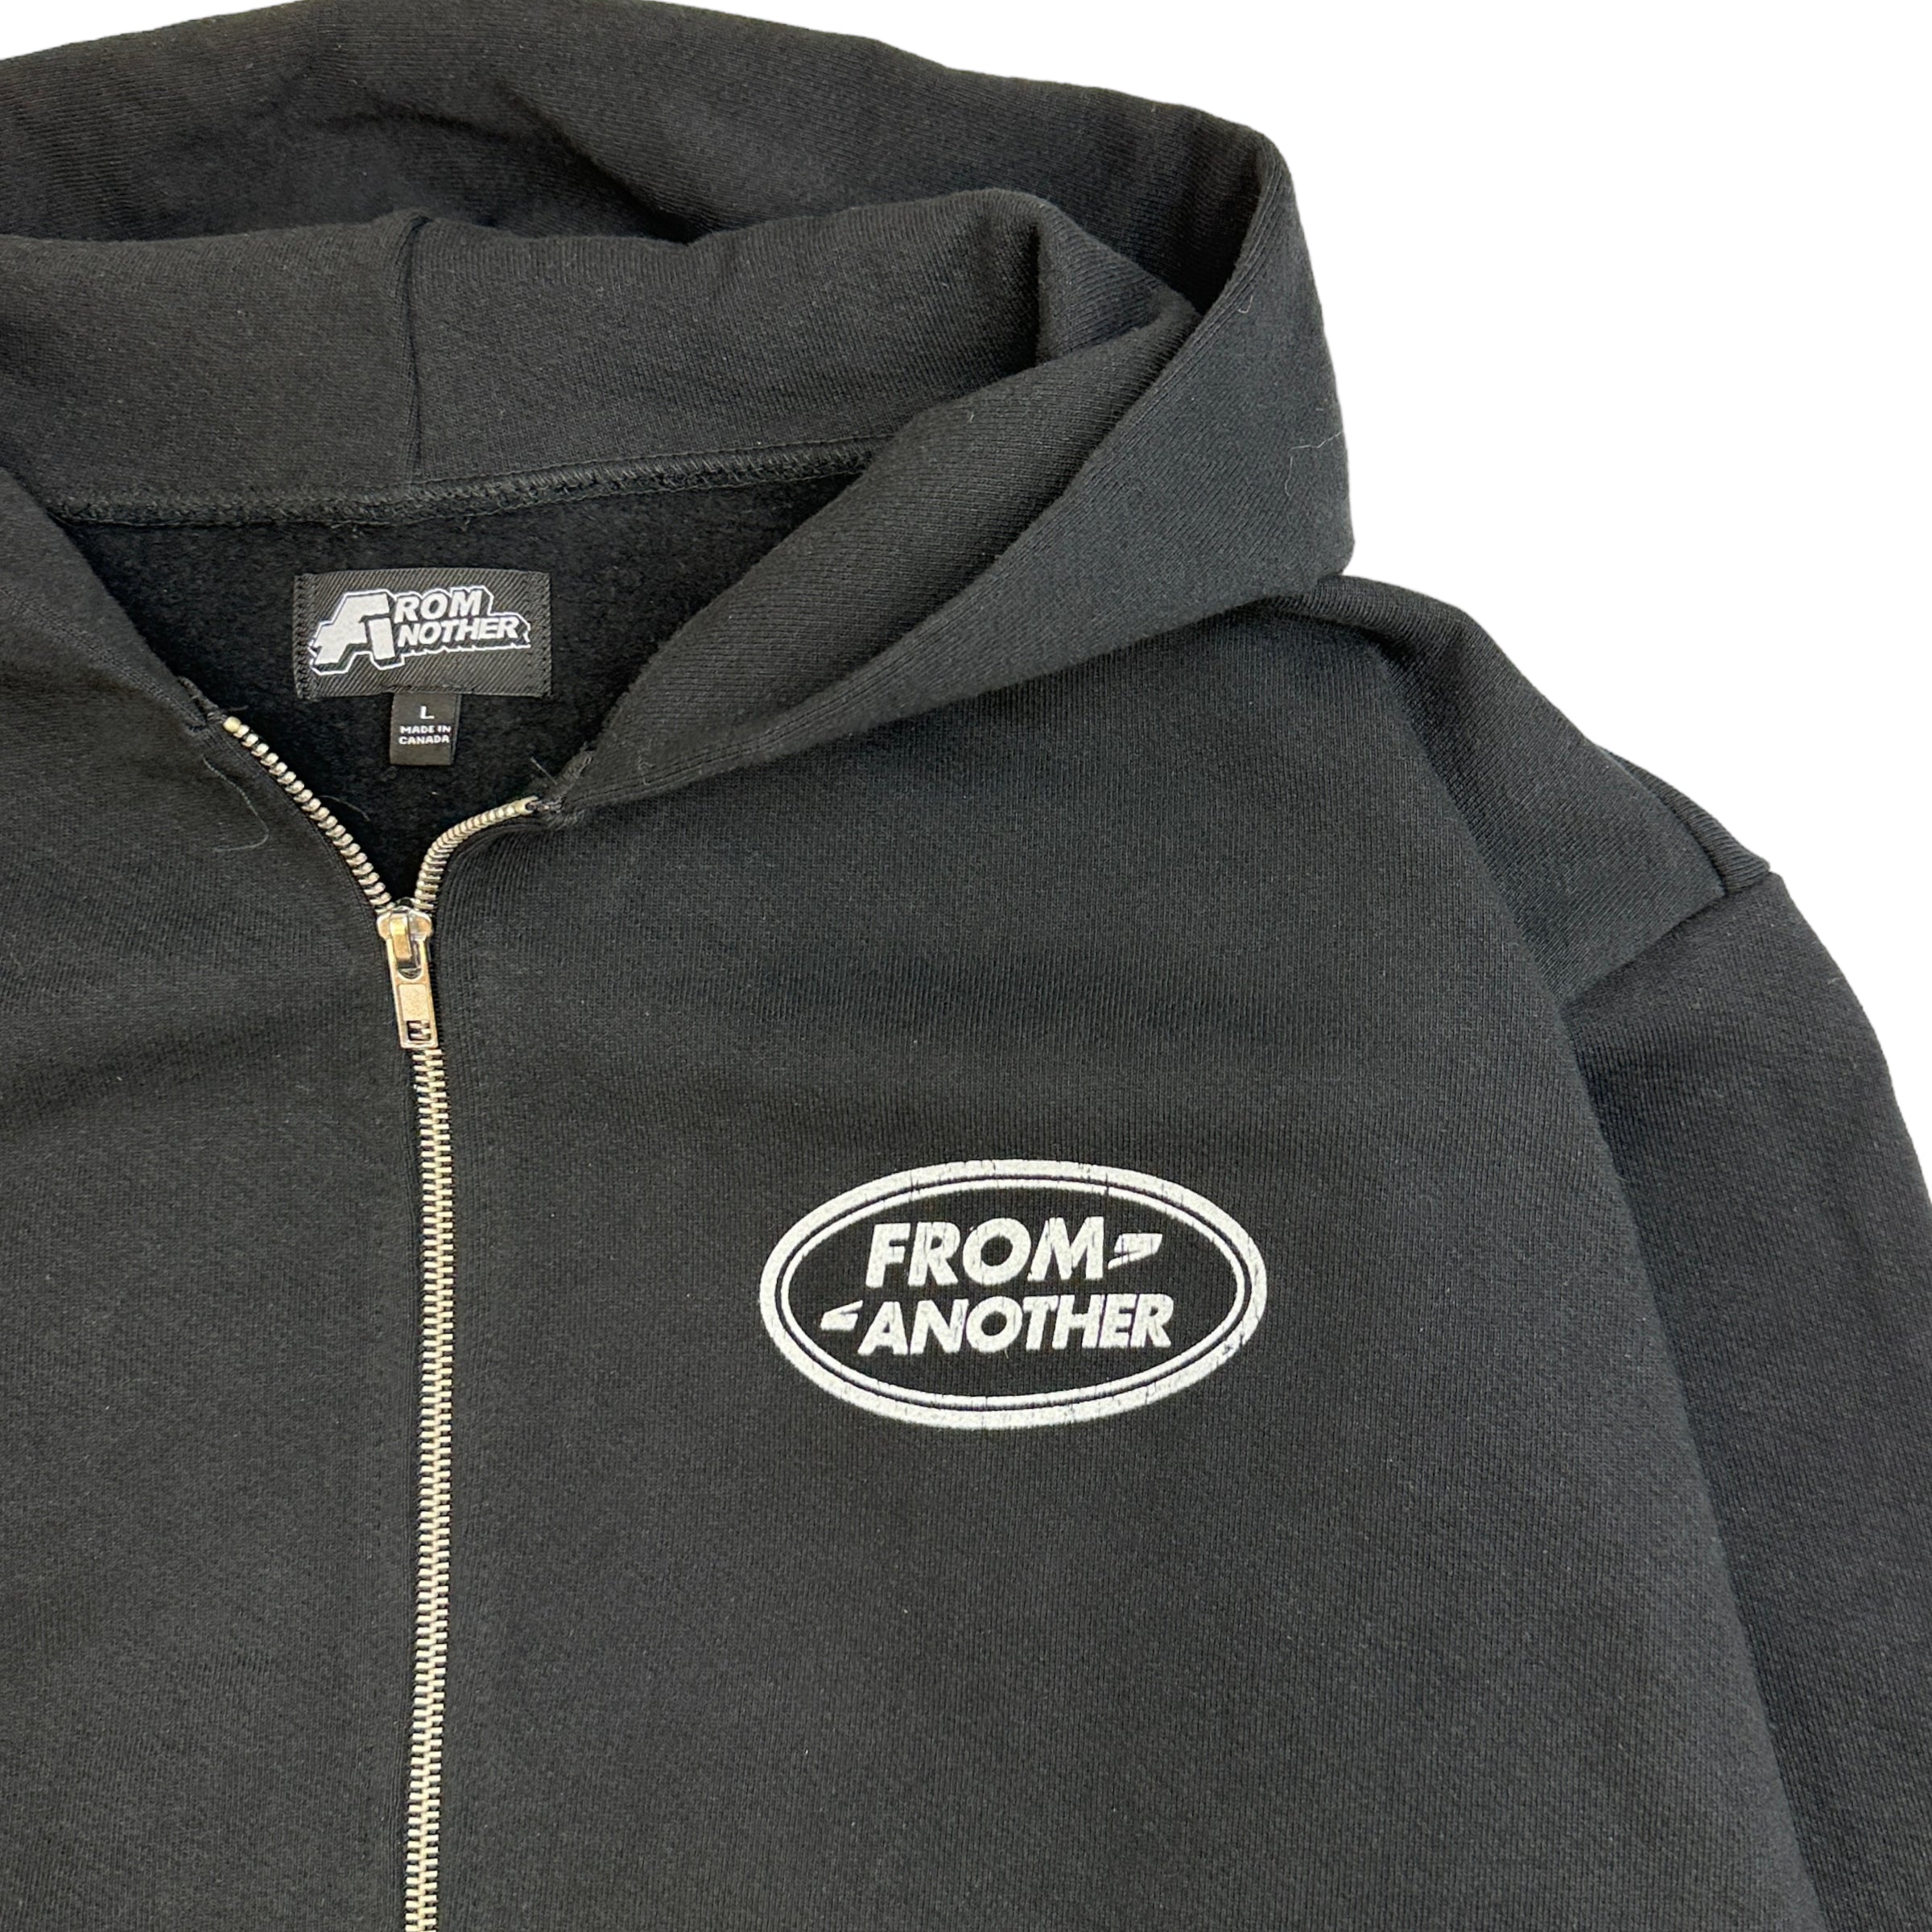 From Another Off-Road Zip-Up Hoodie